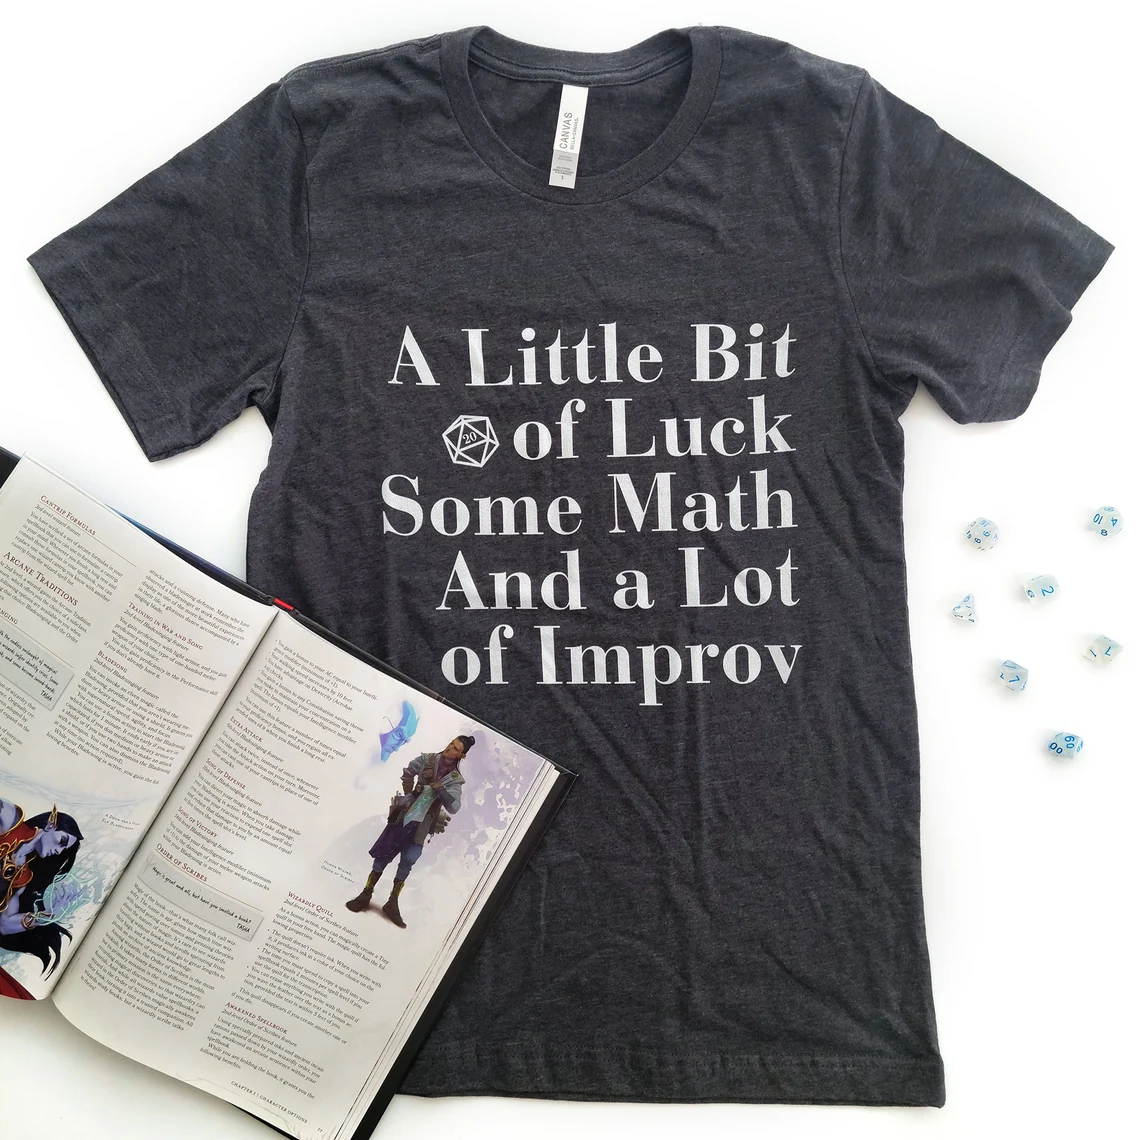 photo of a grey shirt with the text "A Little bit of Luck, Some Math, and a Lot of Improv" written on it with an illustration of a D20 with the "20" facing out